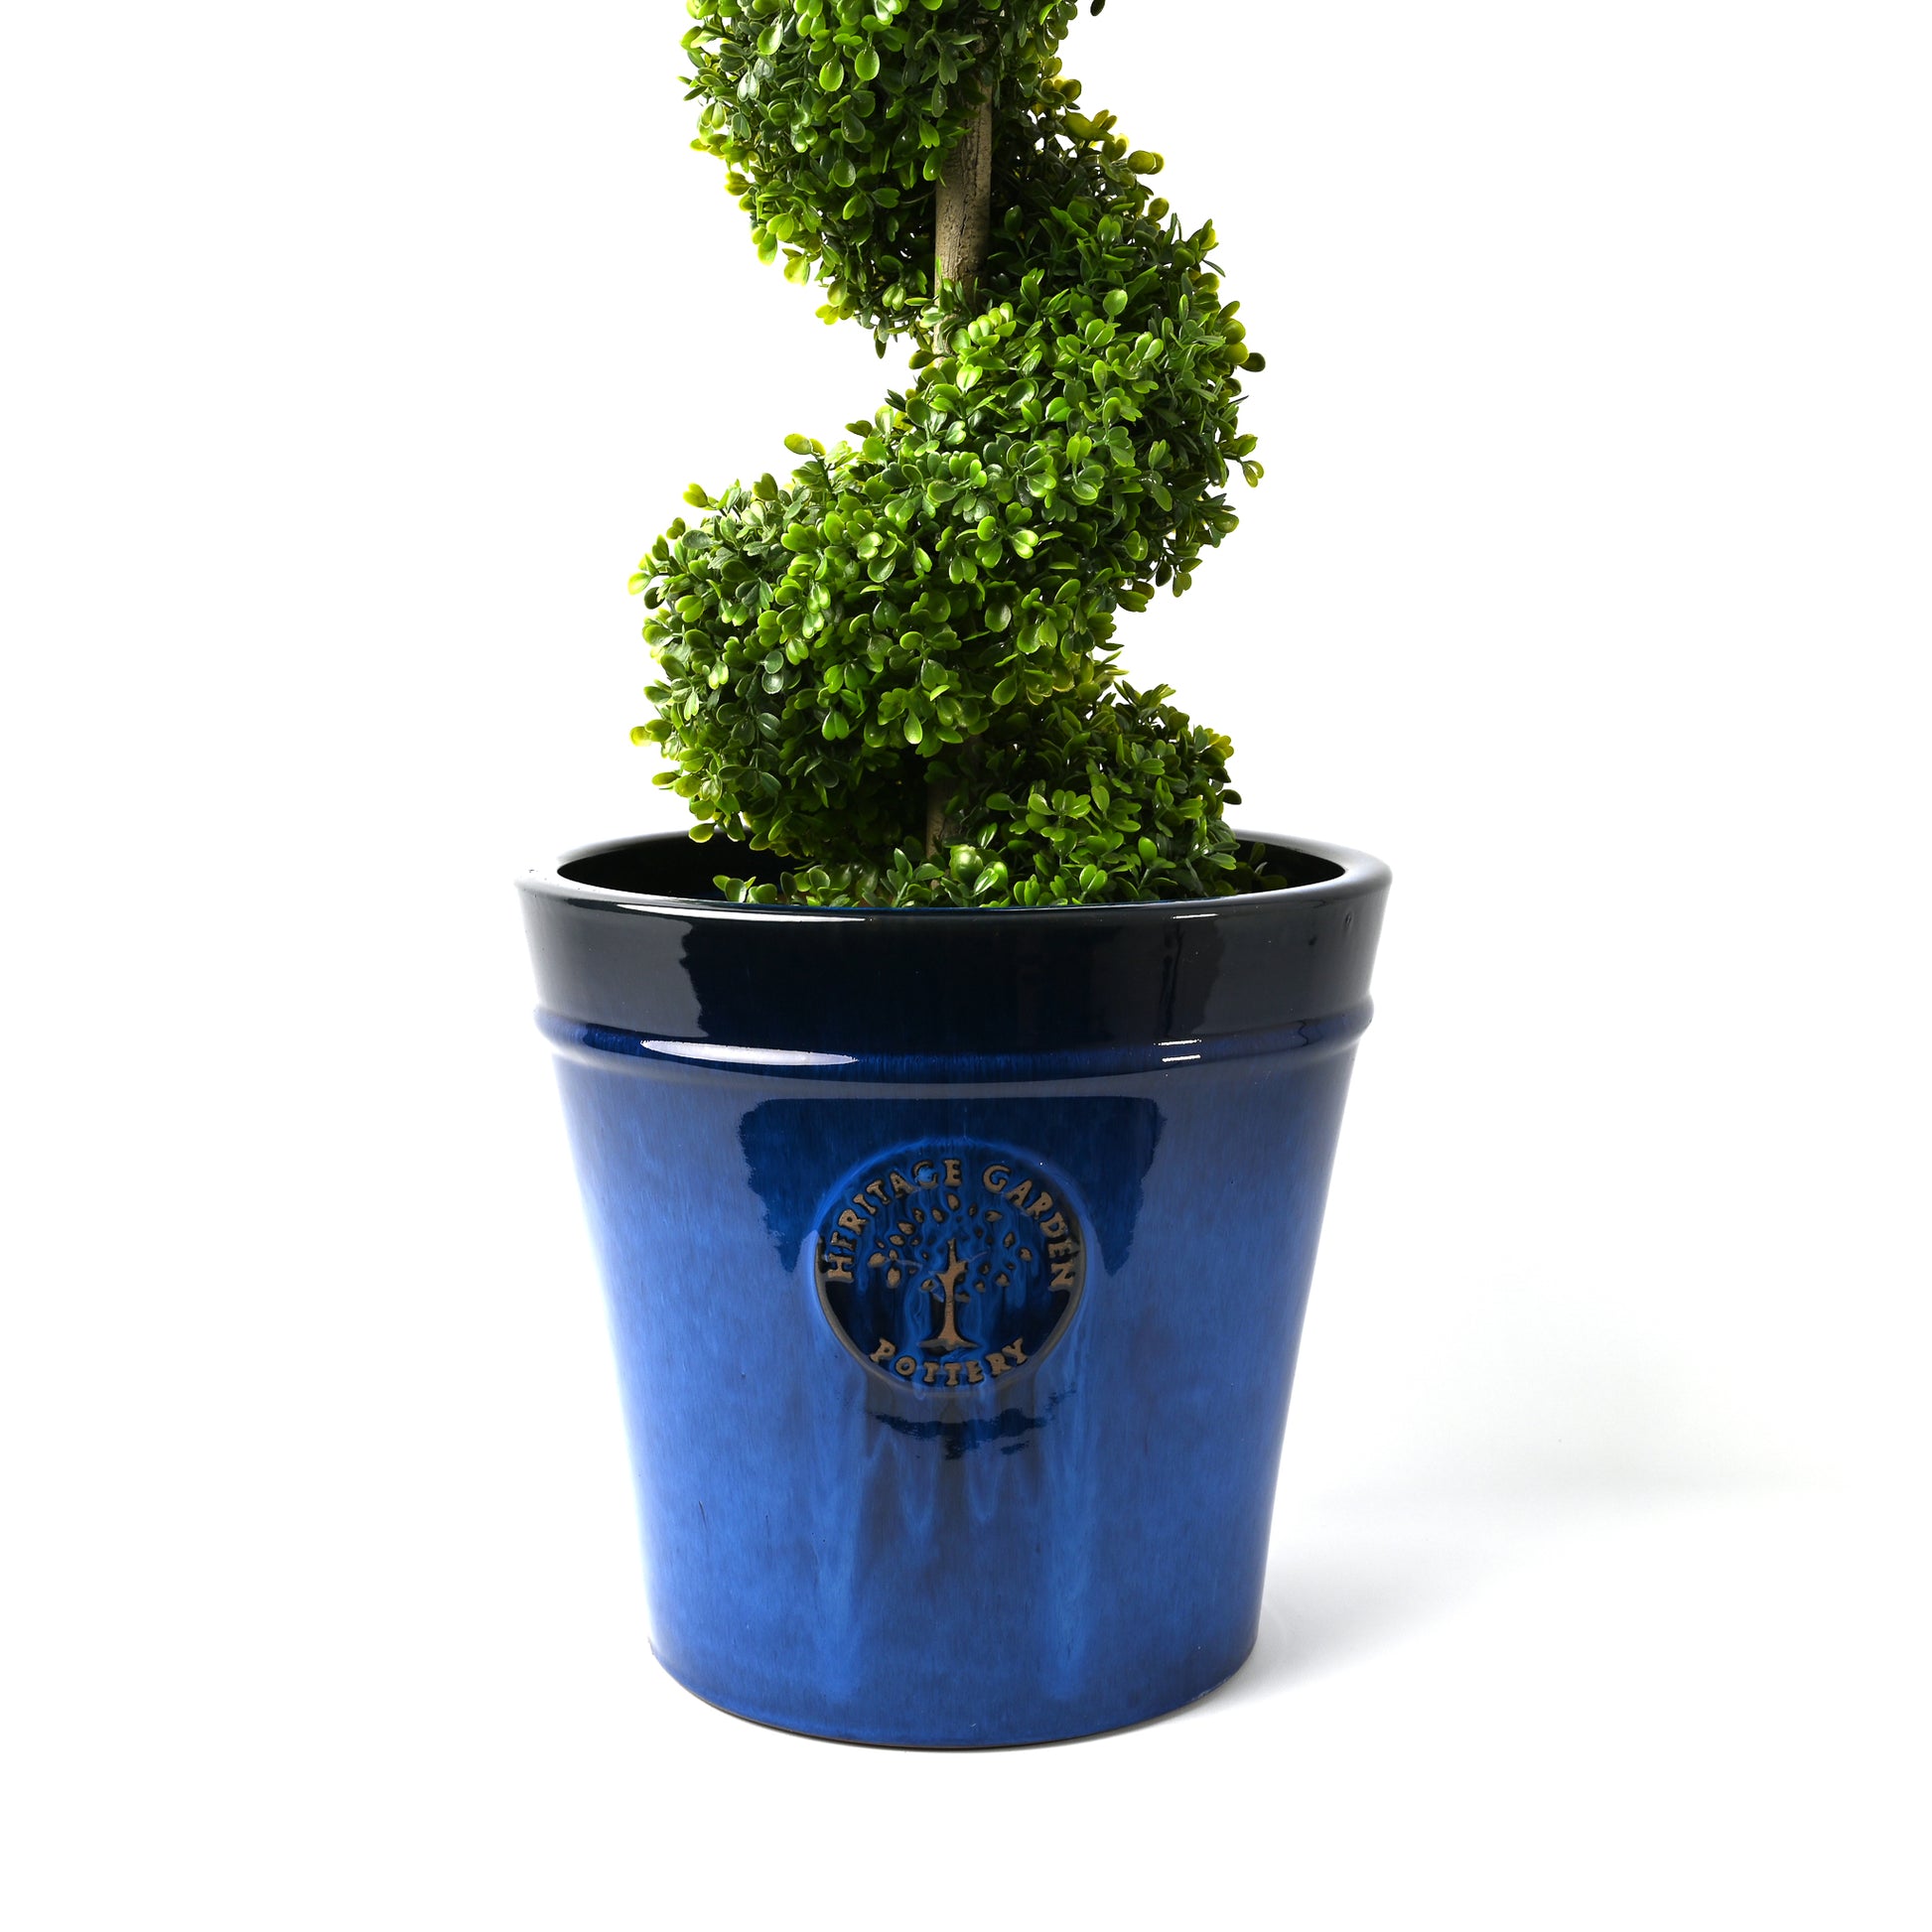 Green Topiary with wooden stick in pot